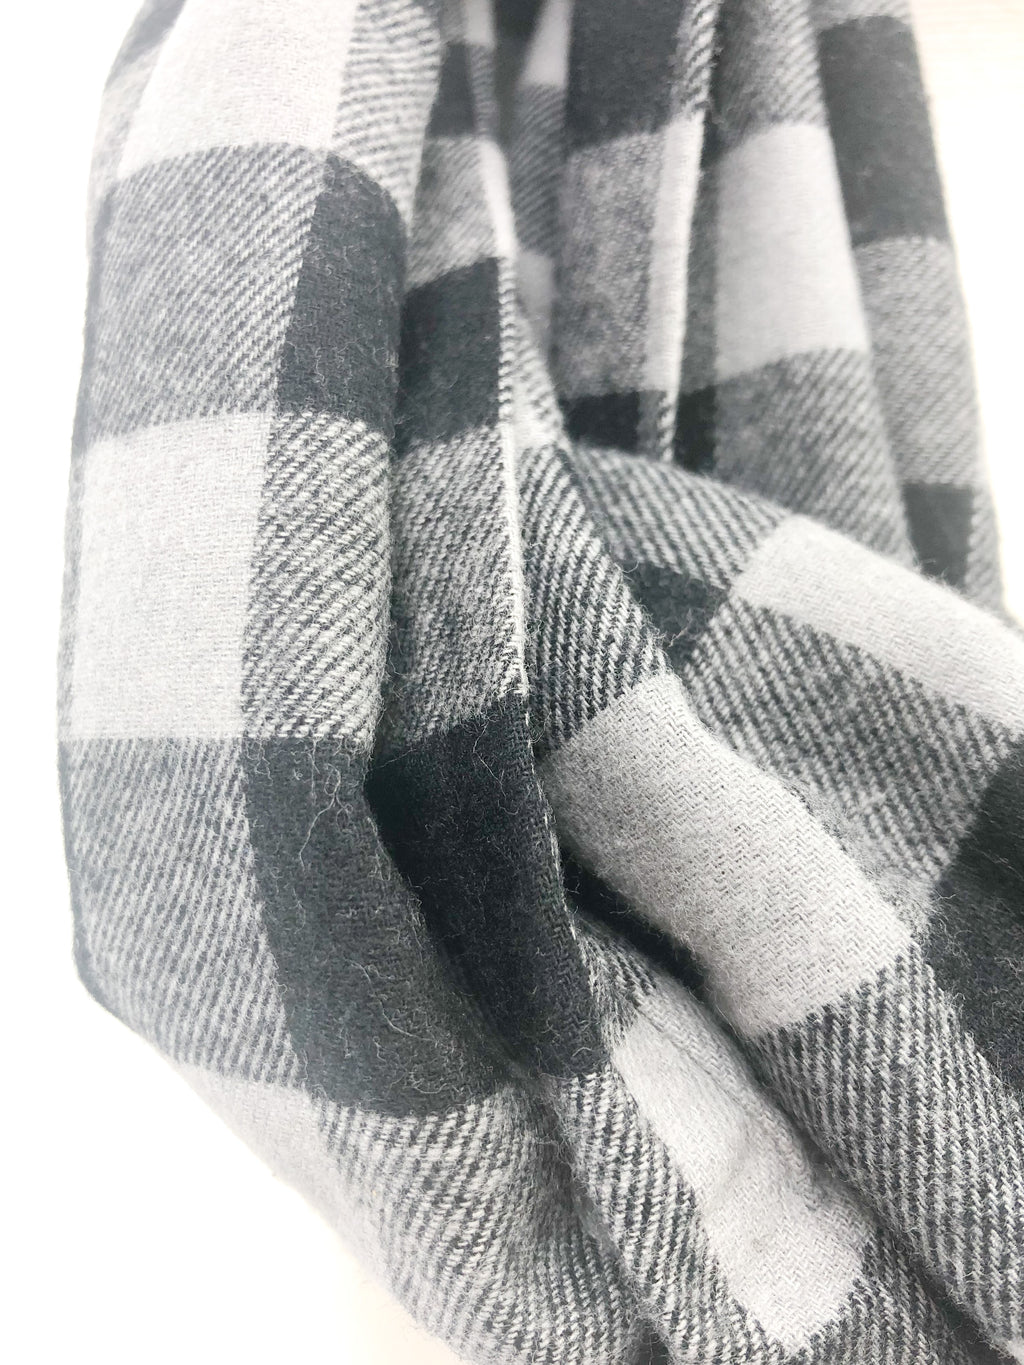 Gray & Black Buffalo Check Eternity Scarf with a Leather Cuff